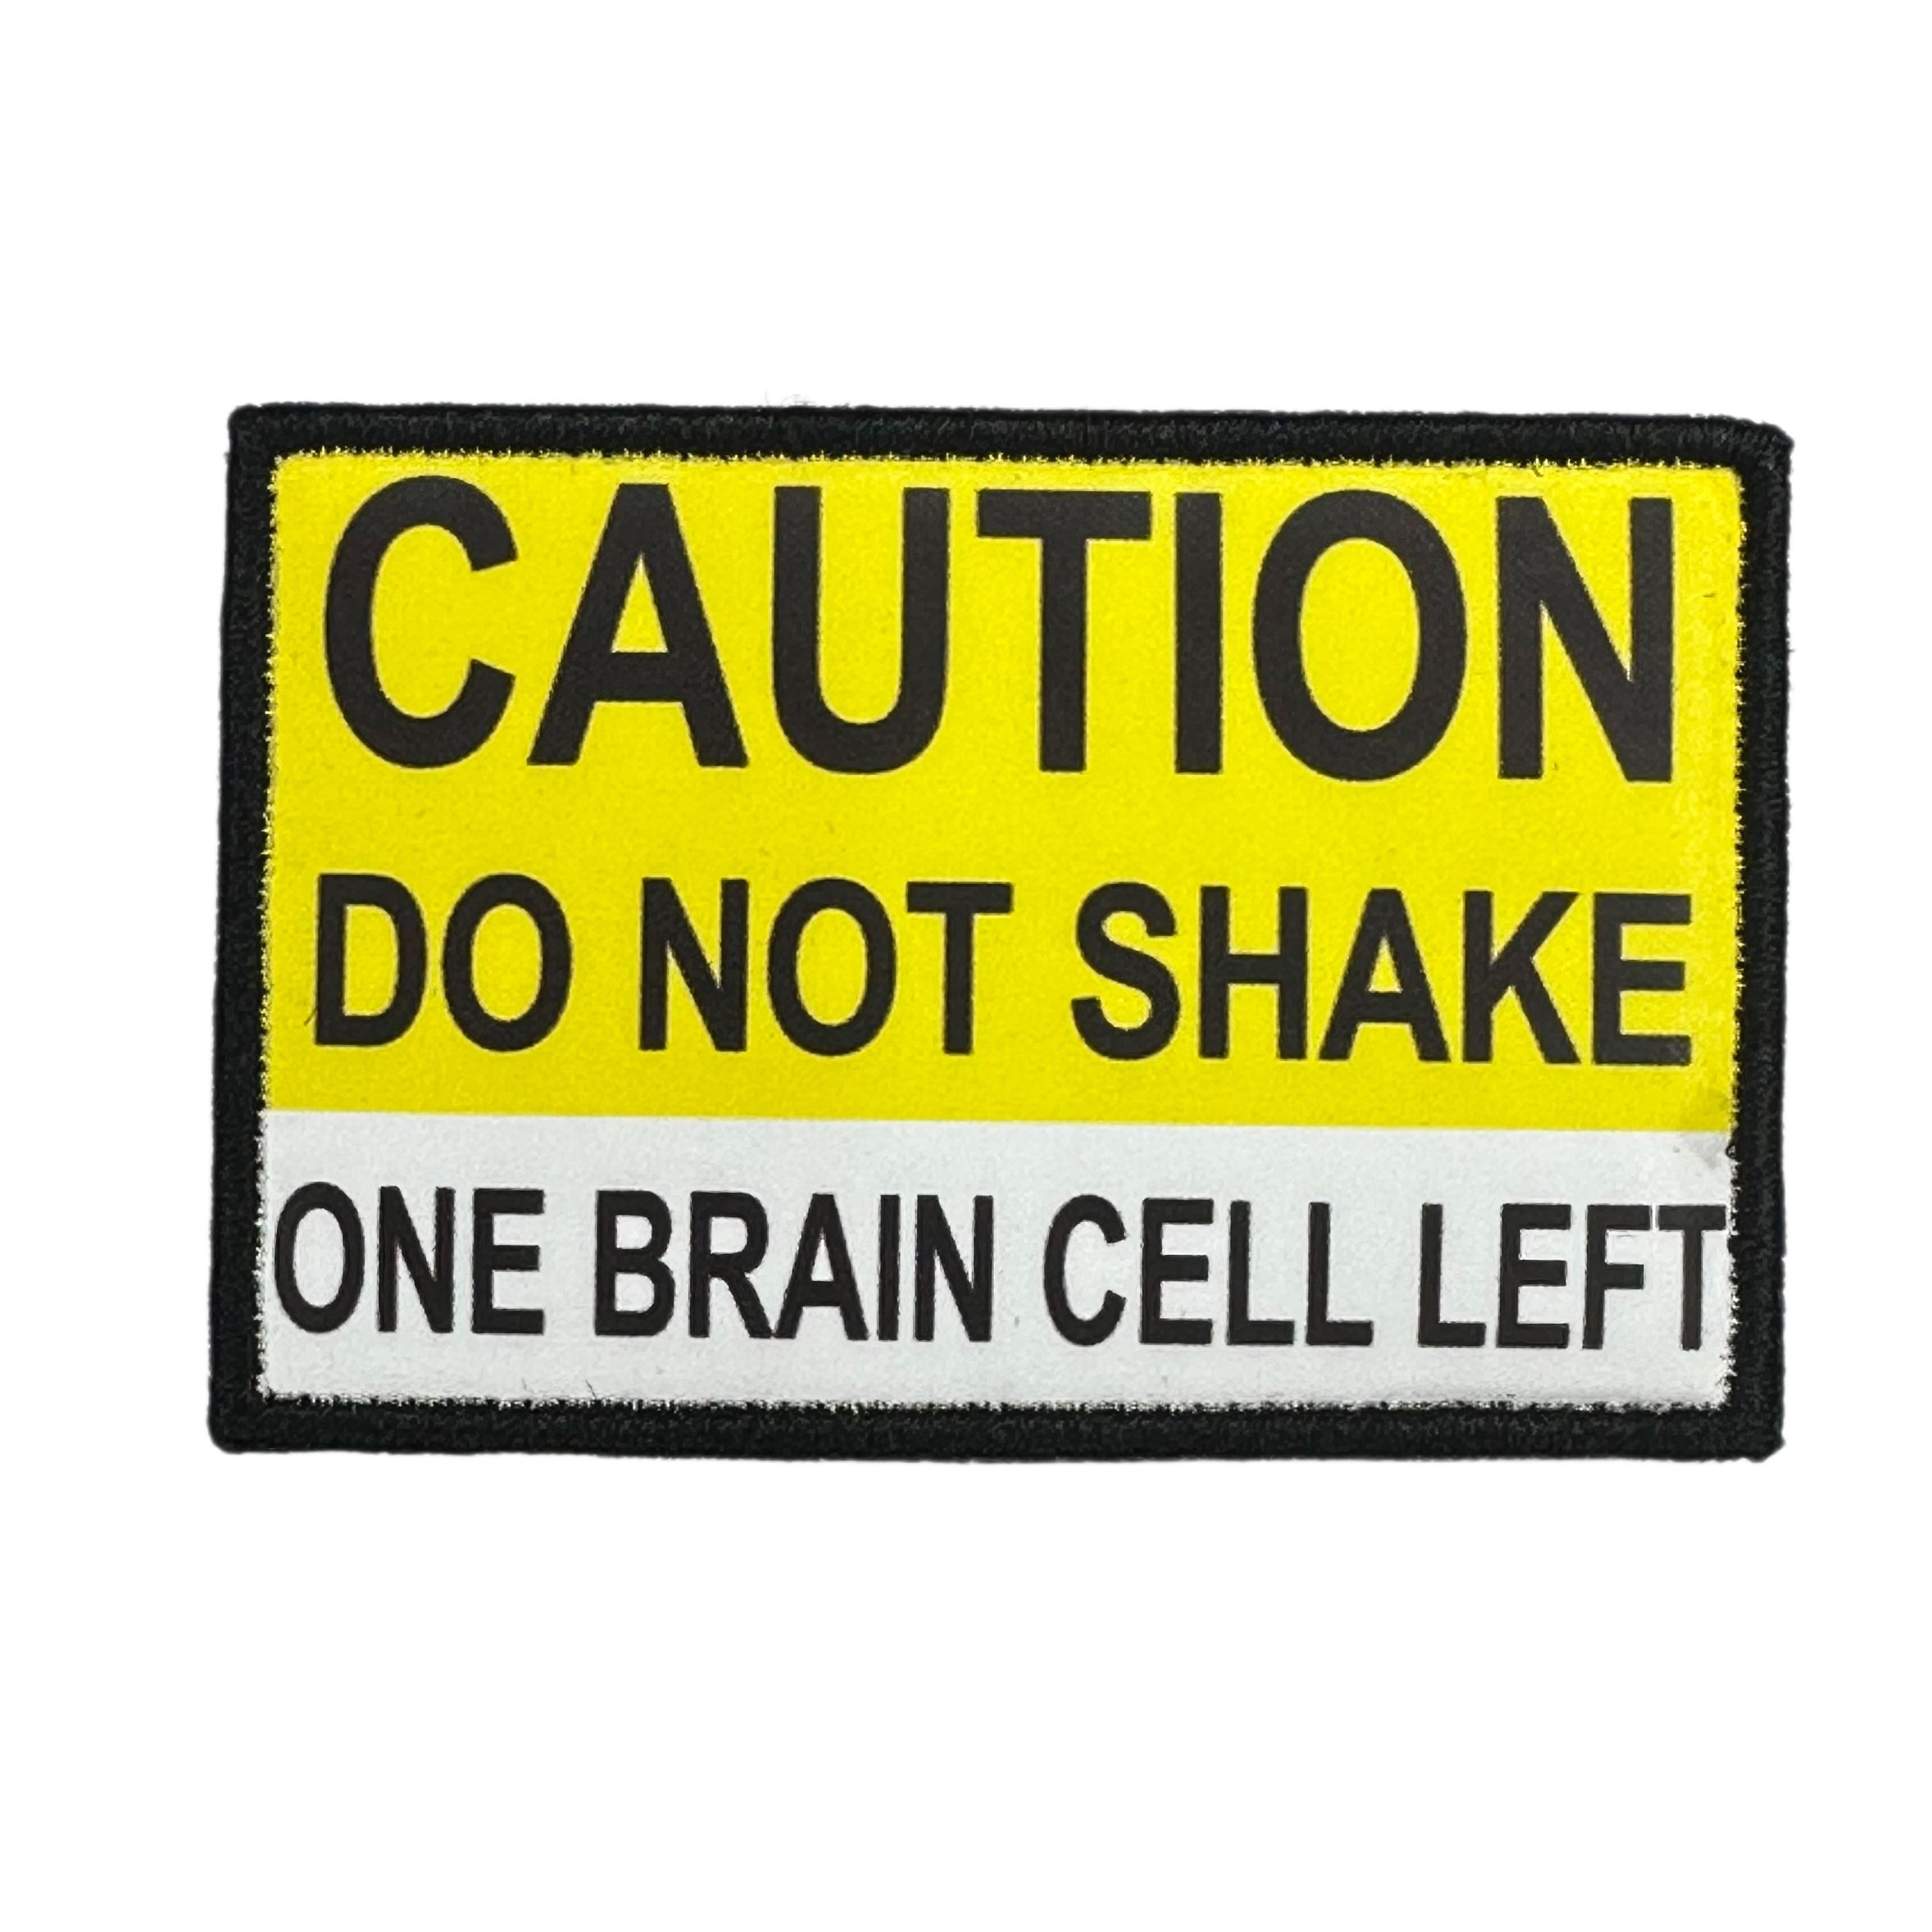 Printed Morale Patches - Caution Do Not Shake One Brain Cell Left Velcro Morale Patch